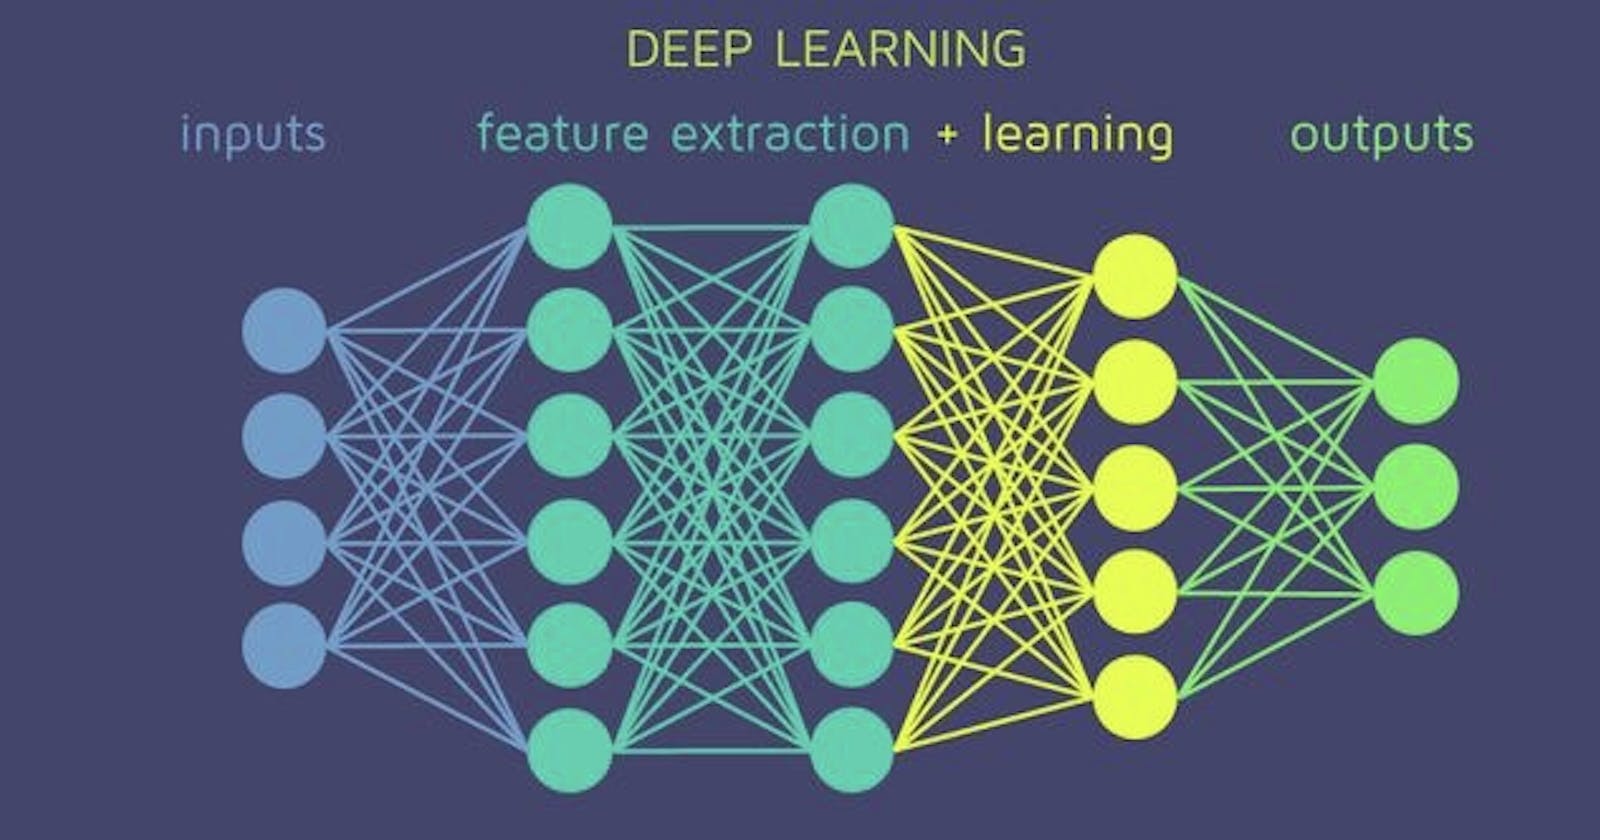 An introduction to deep learning